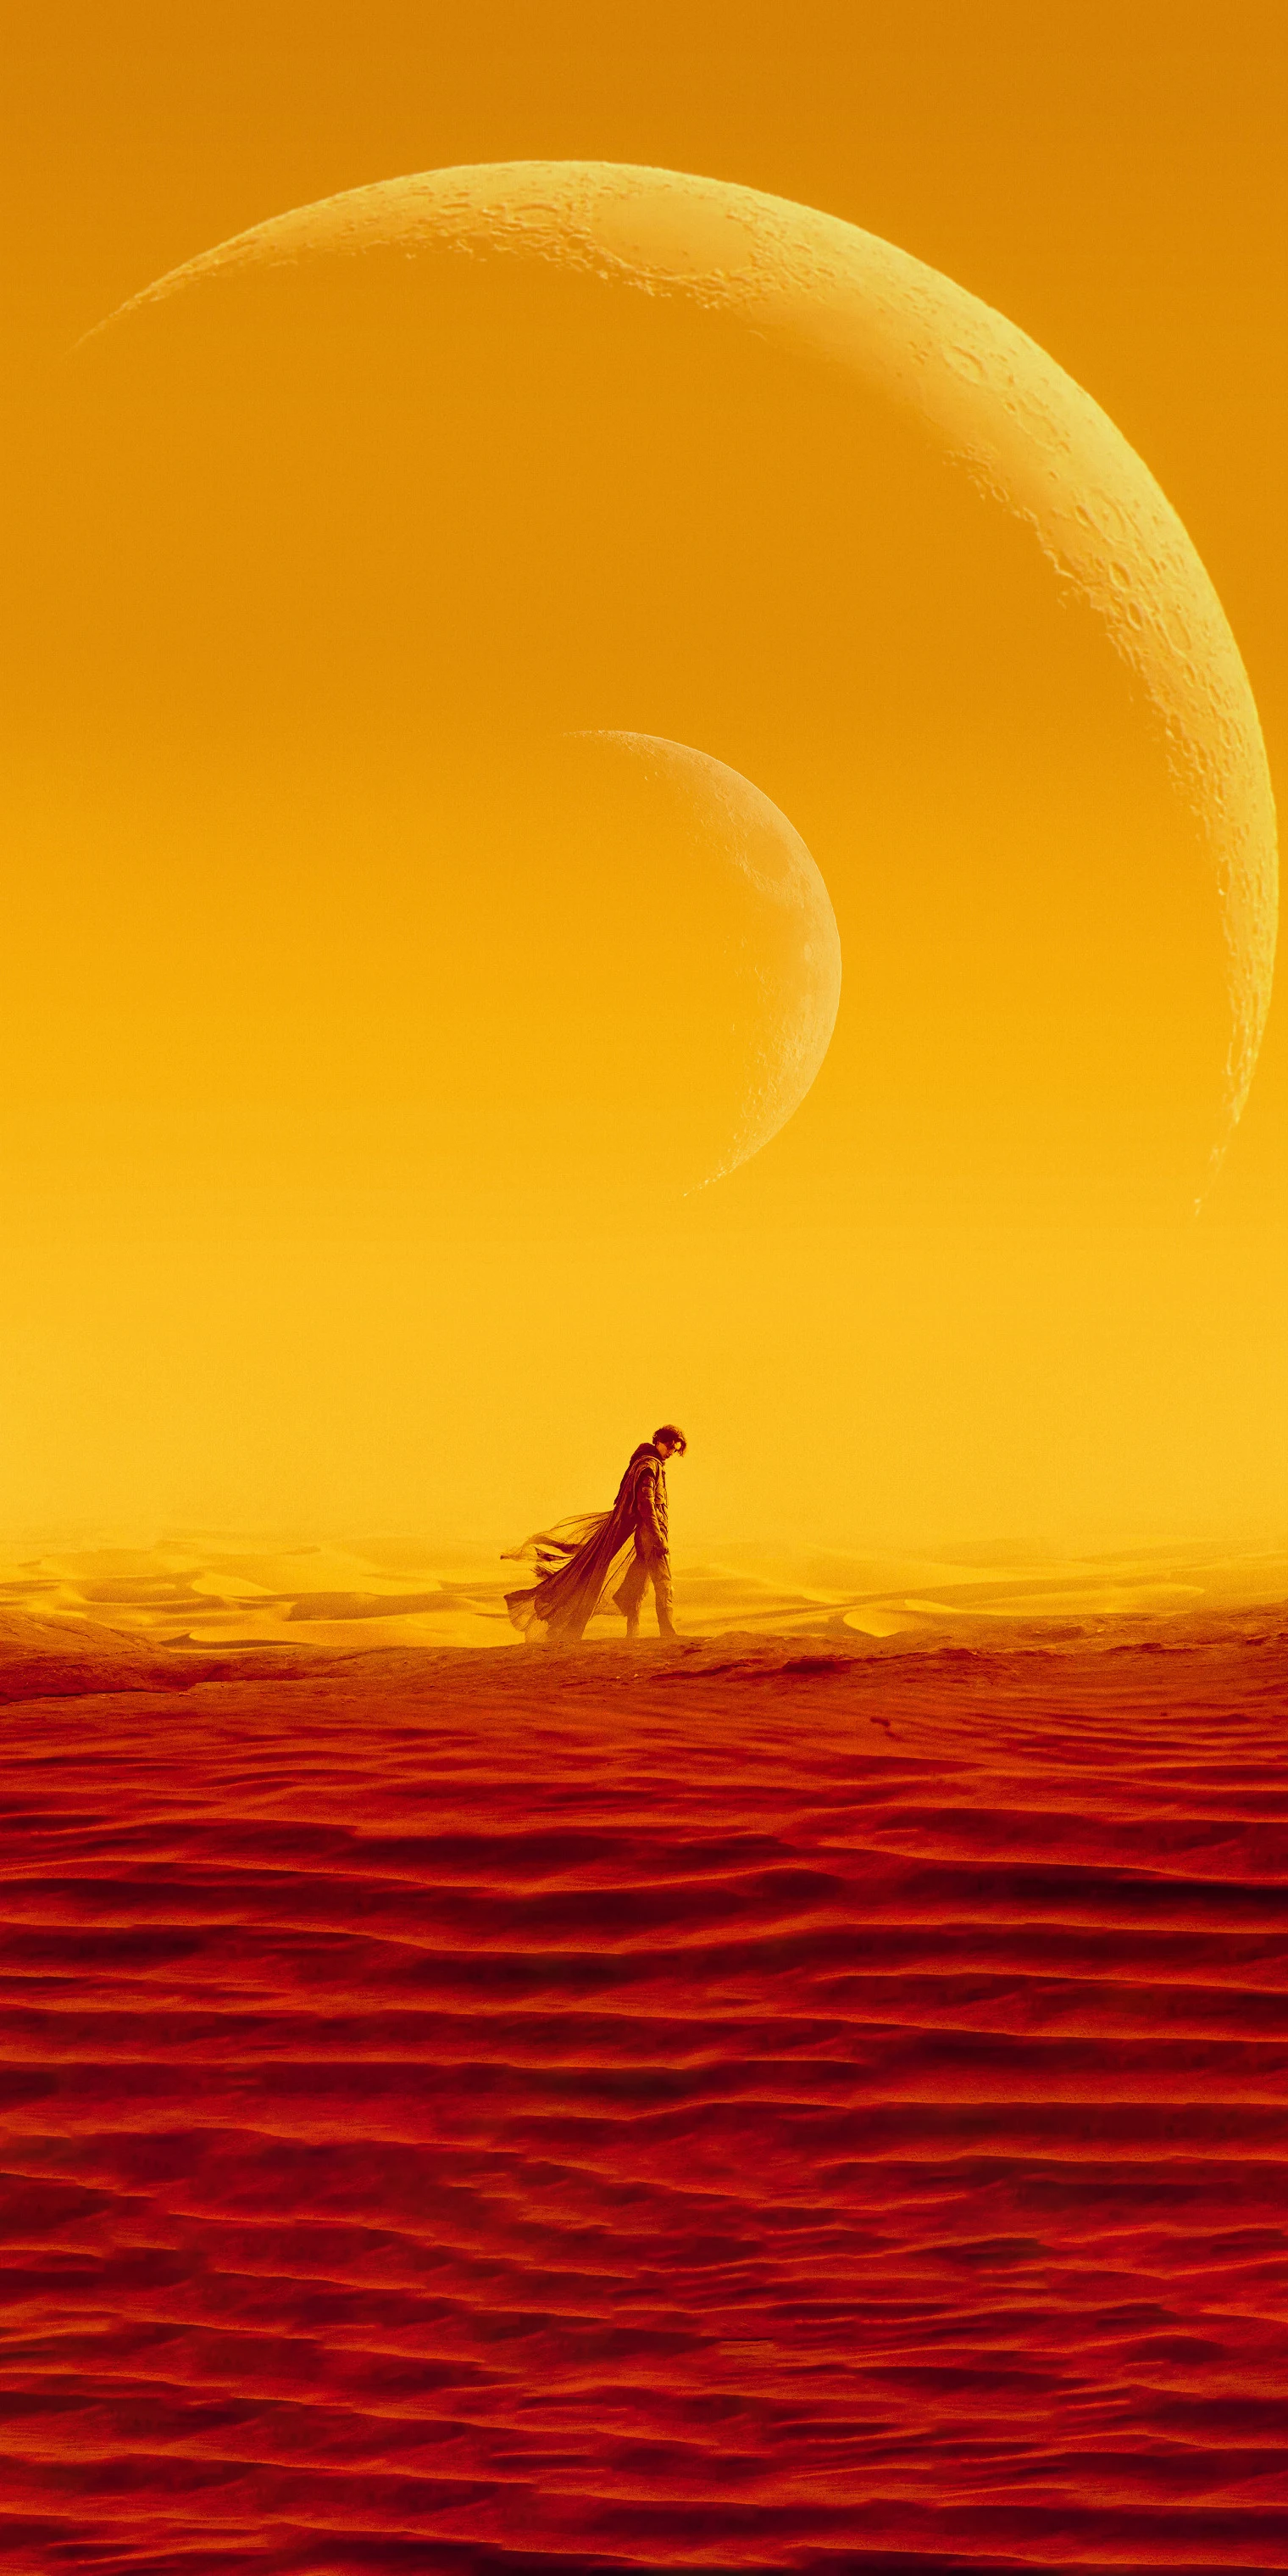 DUNE ILLUSTRATION TO USE AS PHONE WALLPAPER